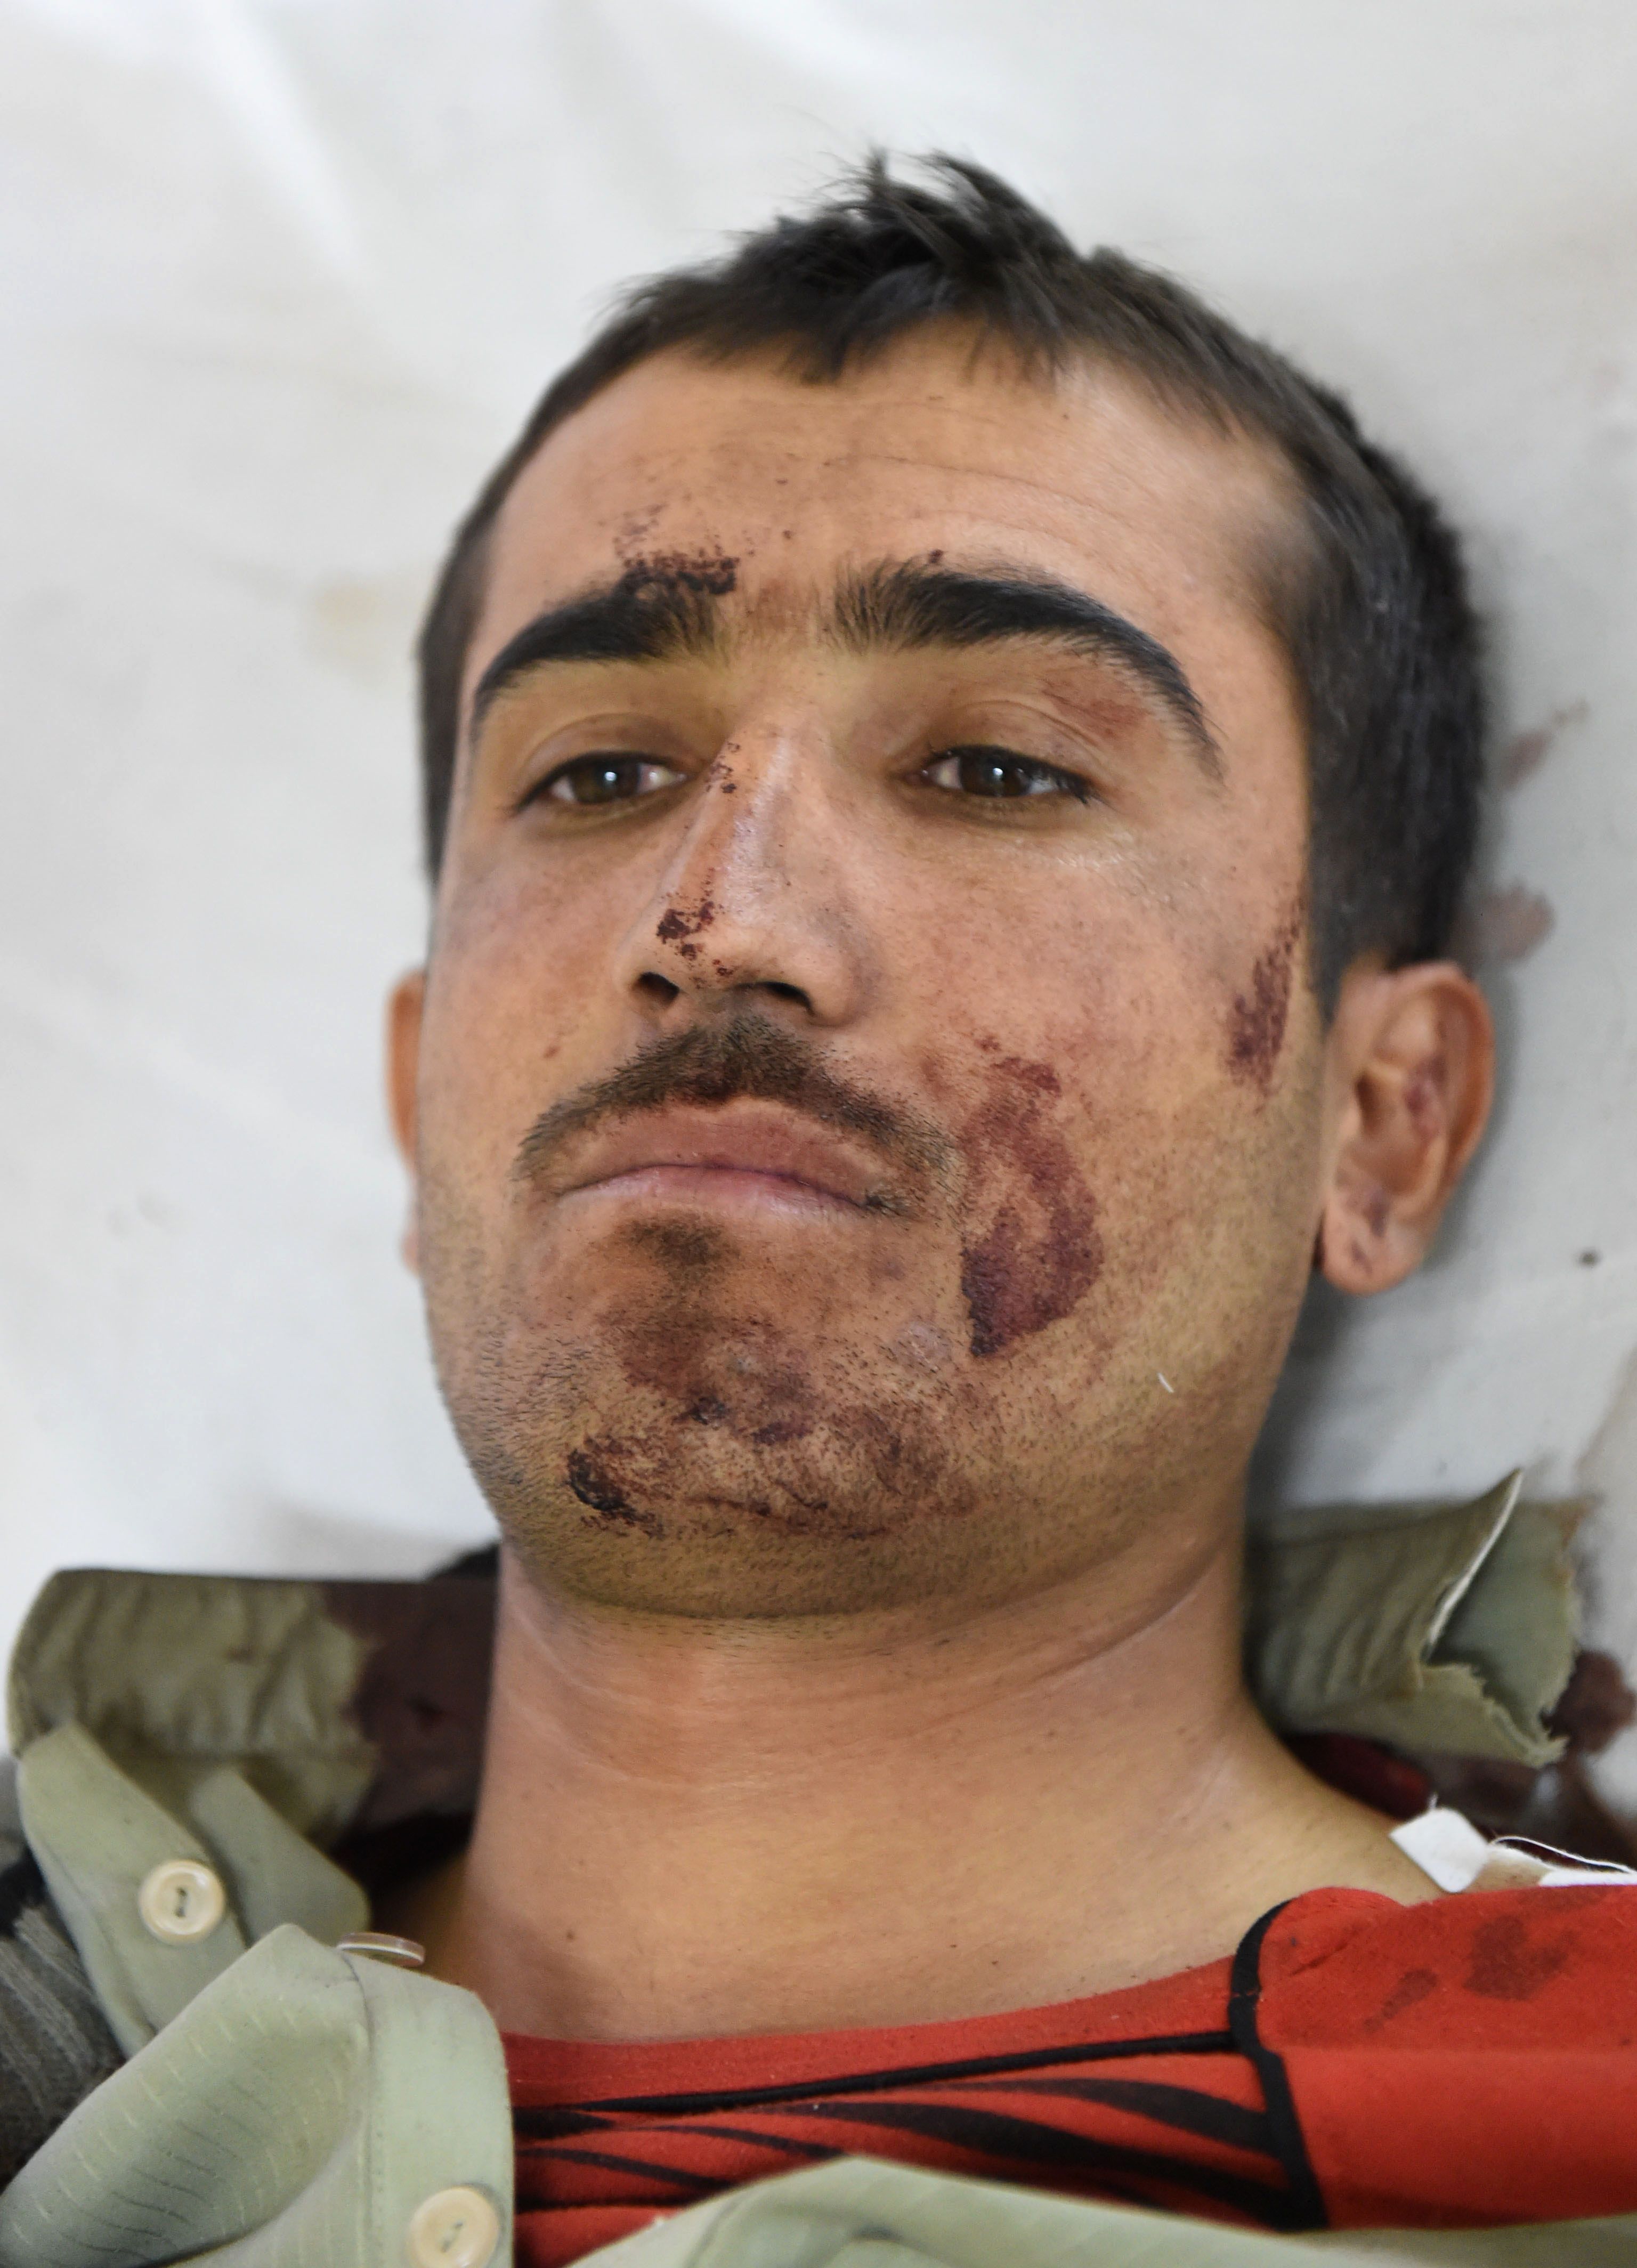 An injured policeman lies on a bed at a hospital in Quetta on October 25, 2016, after an overnight militant attack on the Police Training College Balochistan.